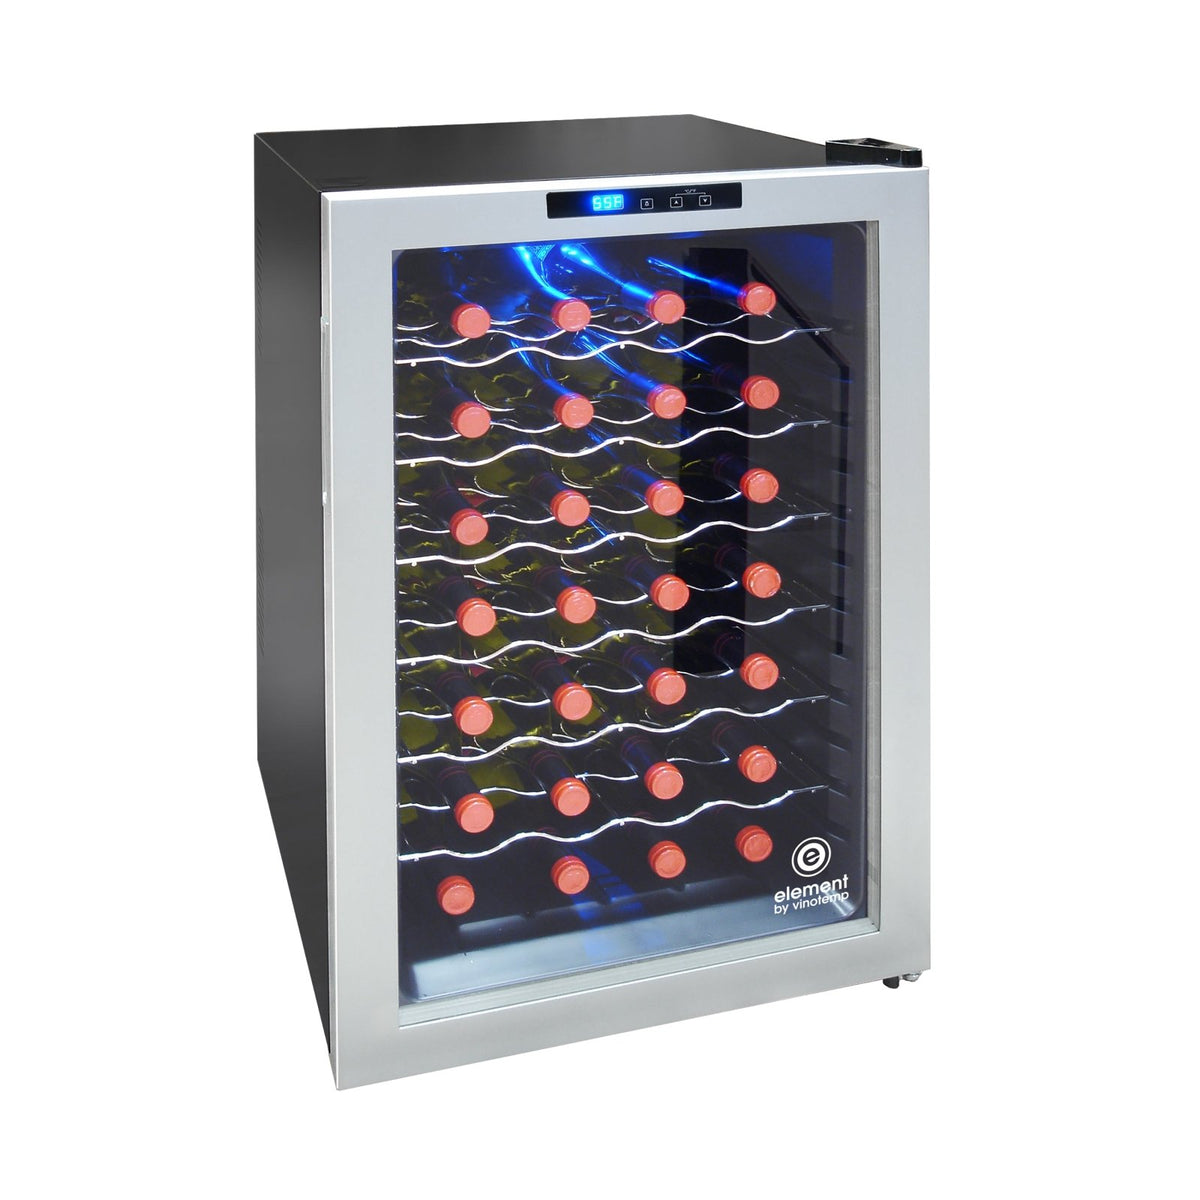 Vinotemp EL - 28SILC Butler Series Wine Cooler with Touch Screen Controls, 28 Bottle Capacity, in Silver - TheChefStore.Com